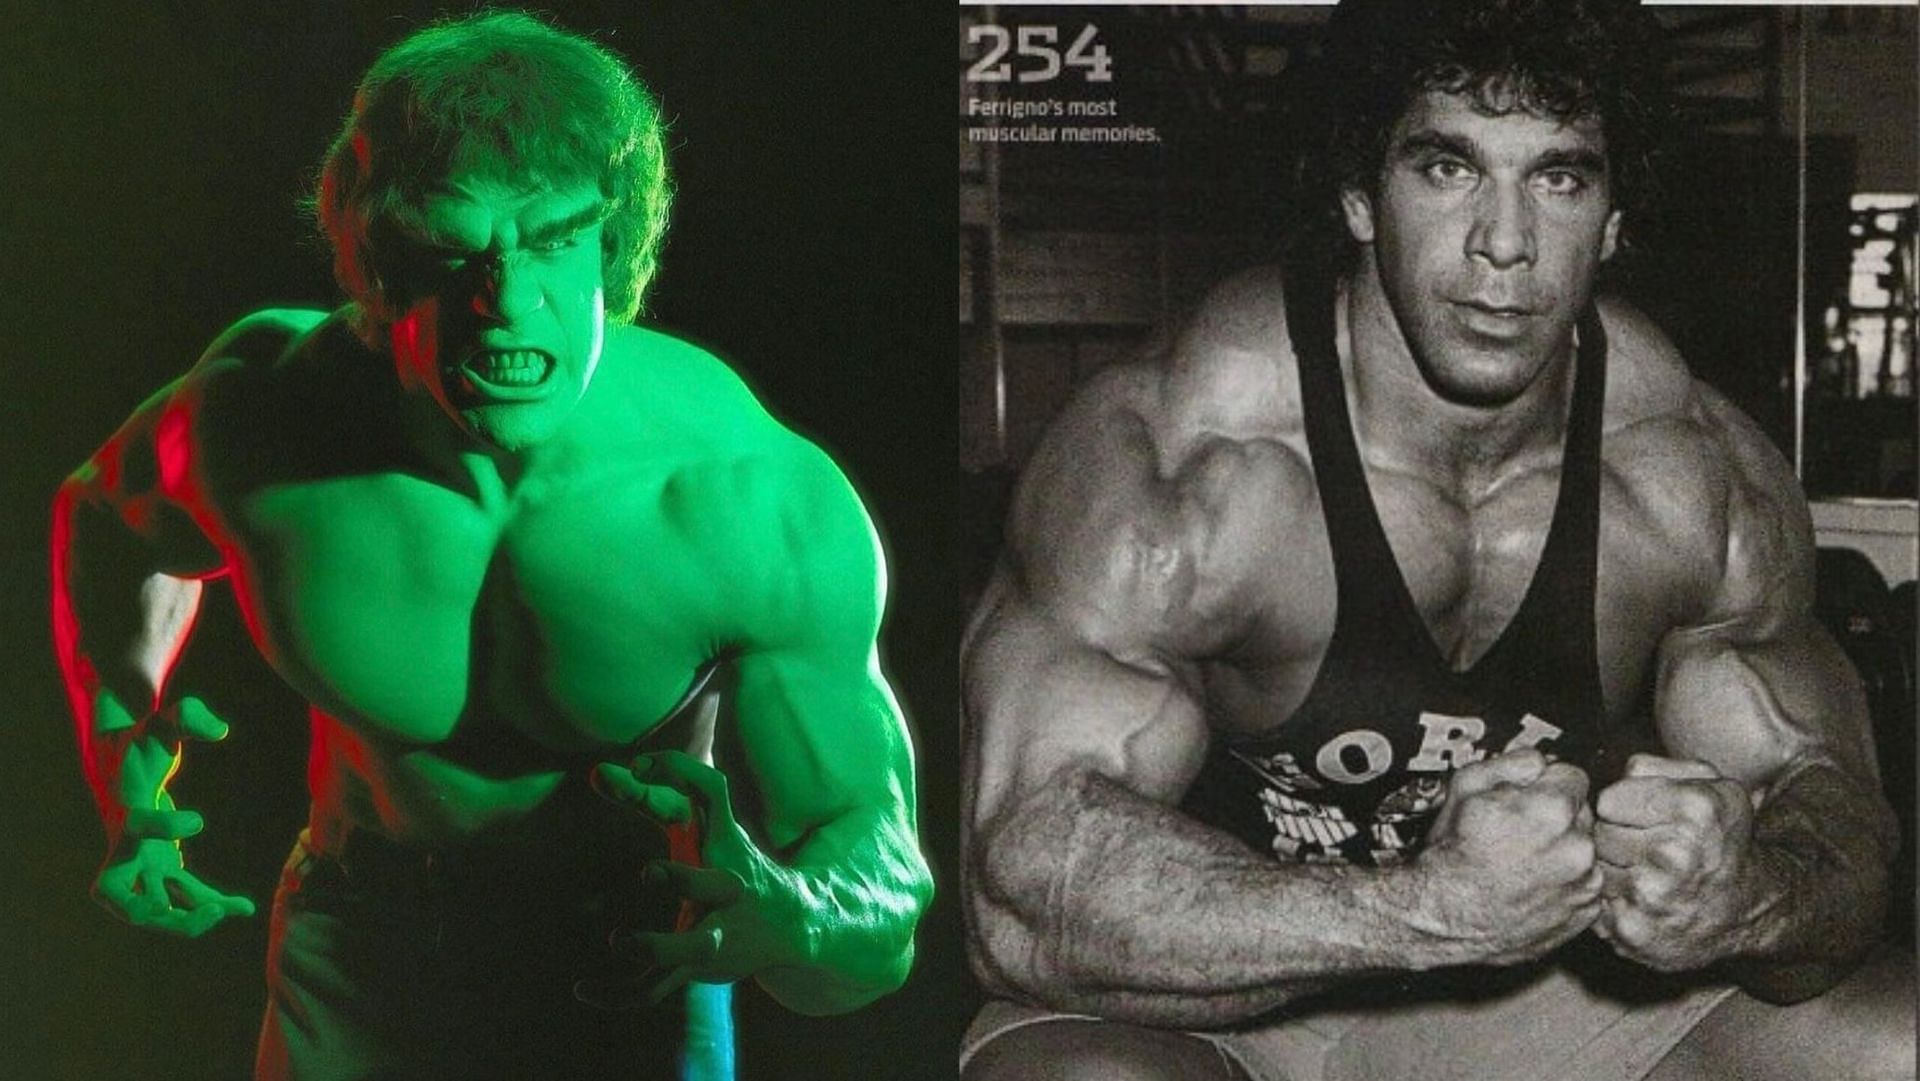 Lou Ferrigno: Discover his training to become Hullk